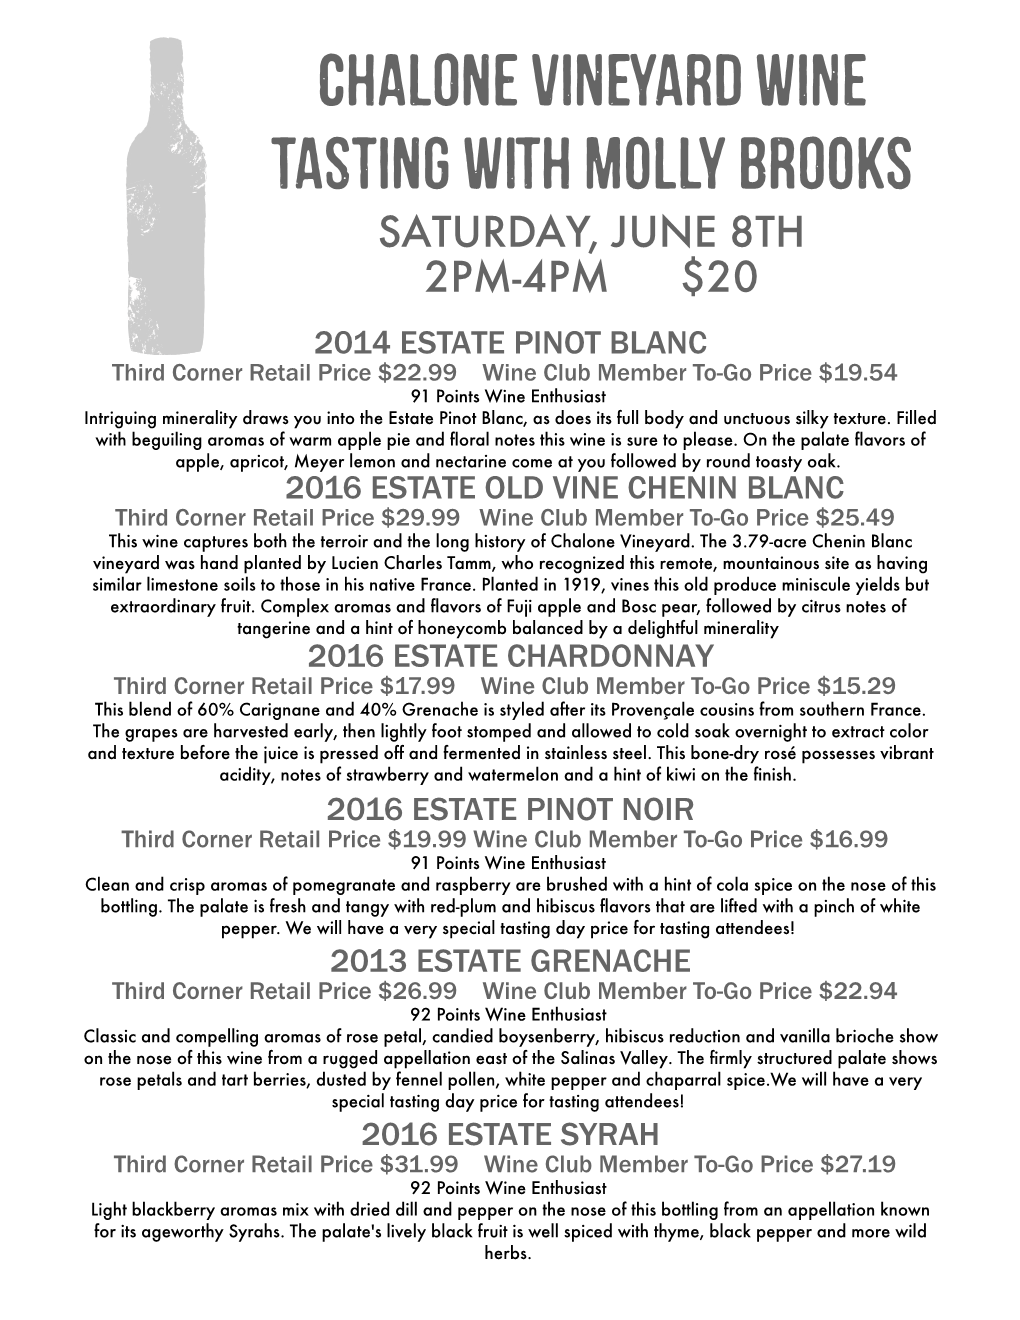 Chalone Vineyard Wine Tasting with Molly Brooks